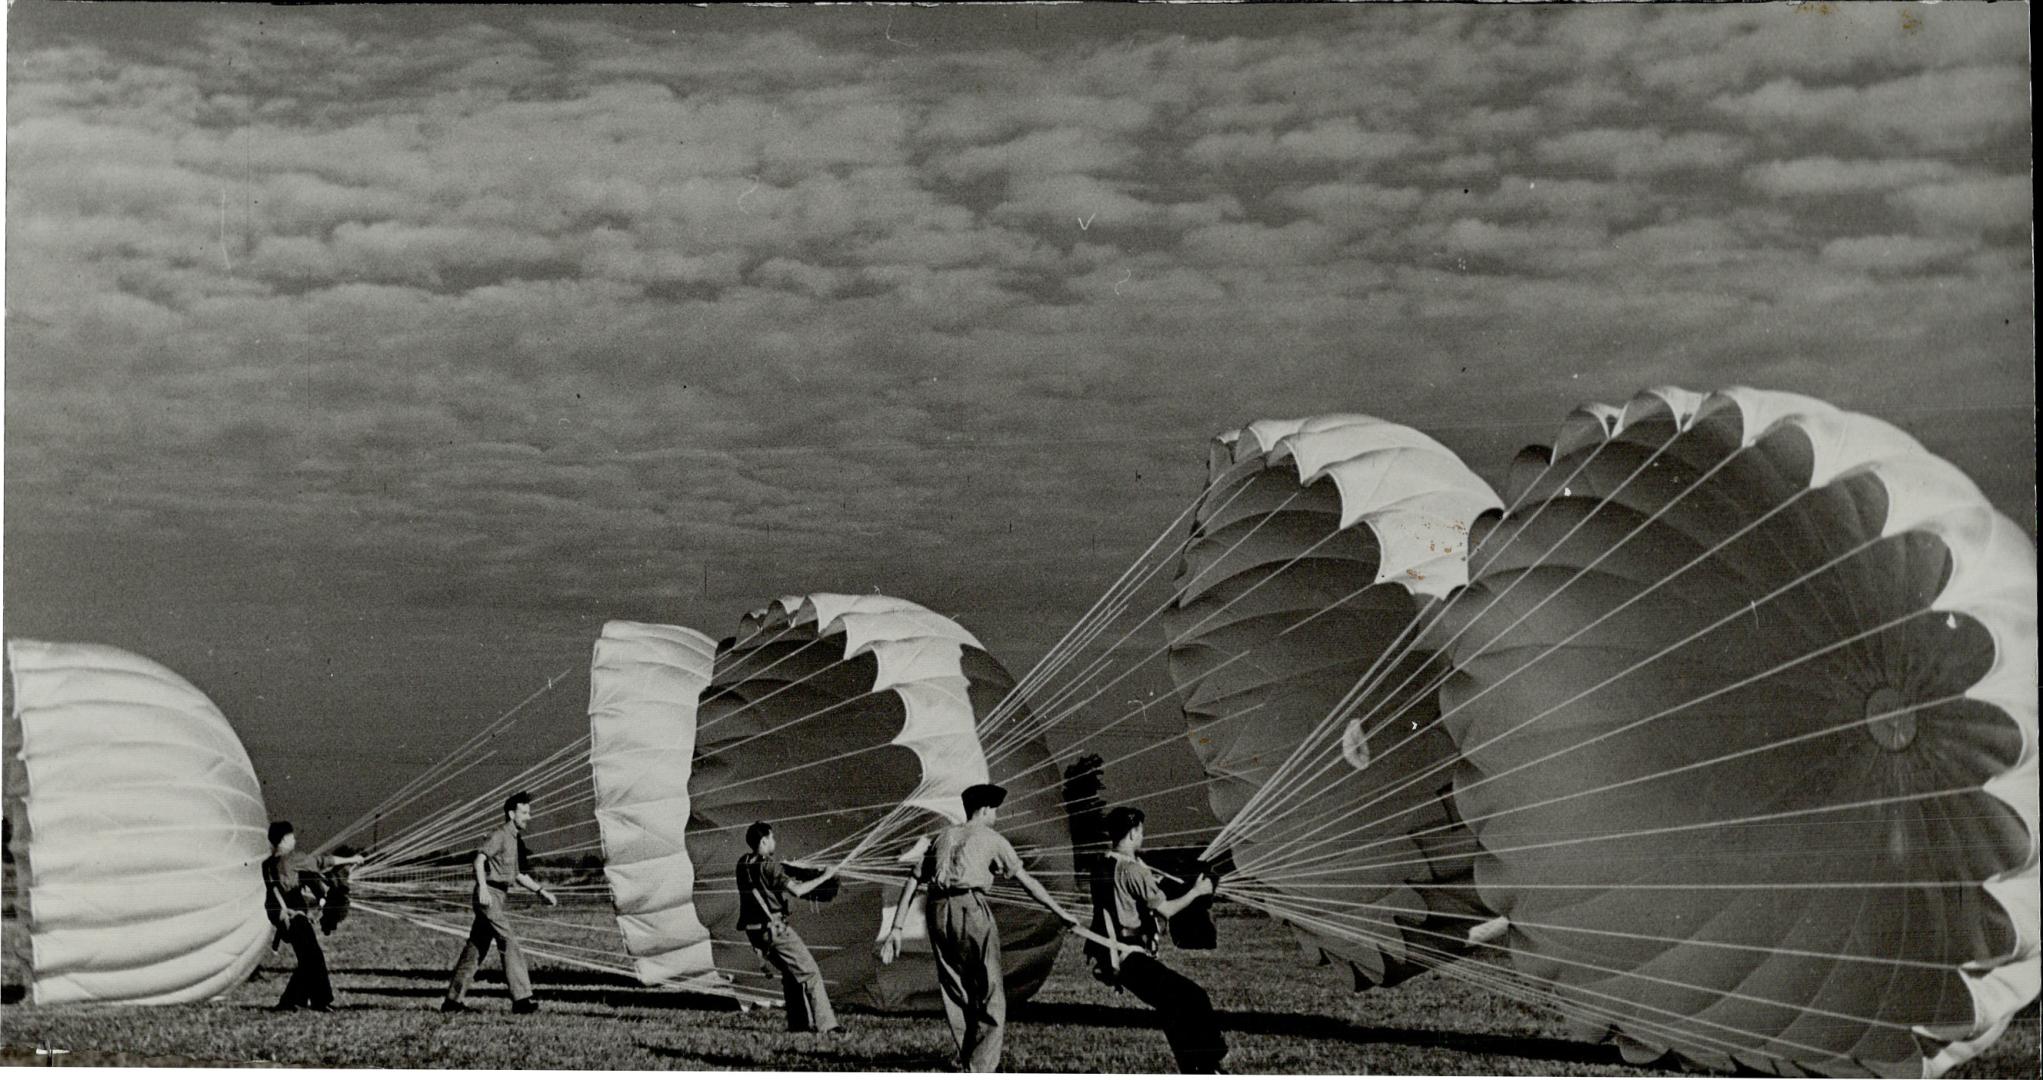 Somewhere in Ontario, at an R.C.A.F. training field, these men are learning the art of waging warfare from the skies. Handling parachutes is included (...)